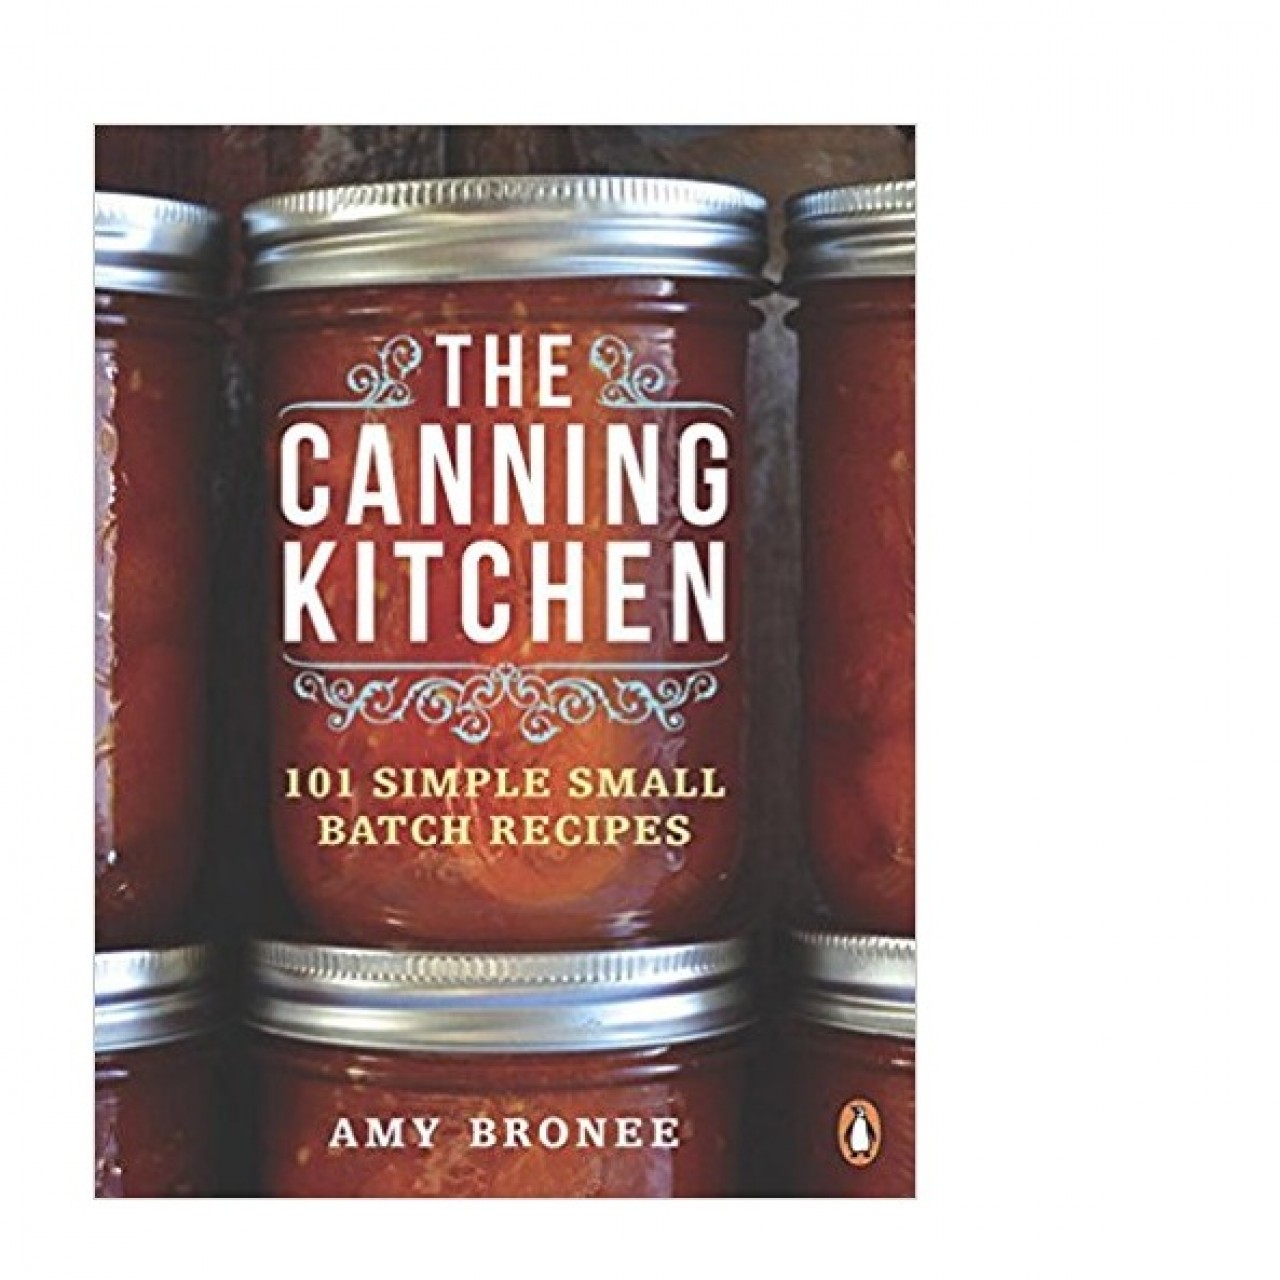 64. The Canning Kitchen: 101 Simple Small Batch Recipes